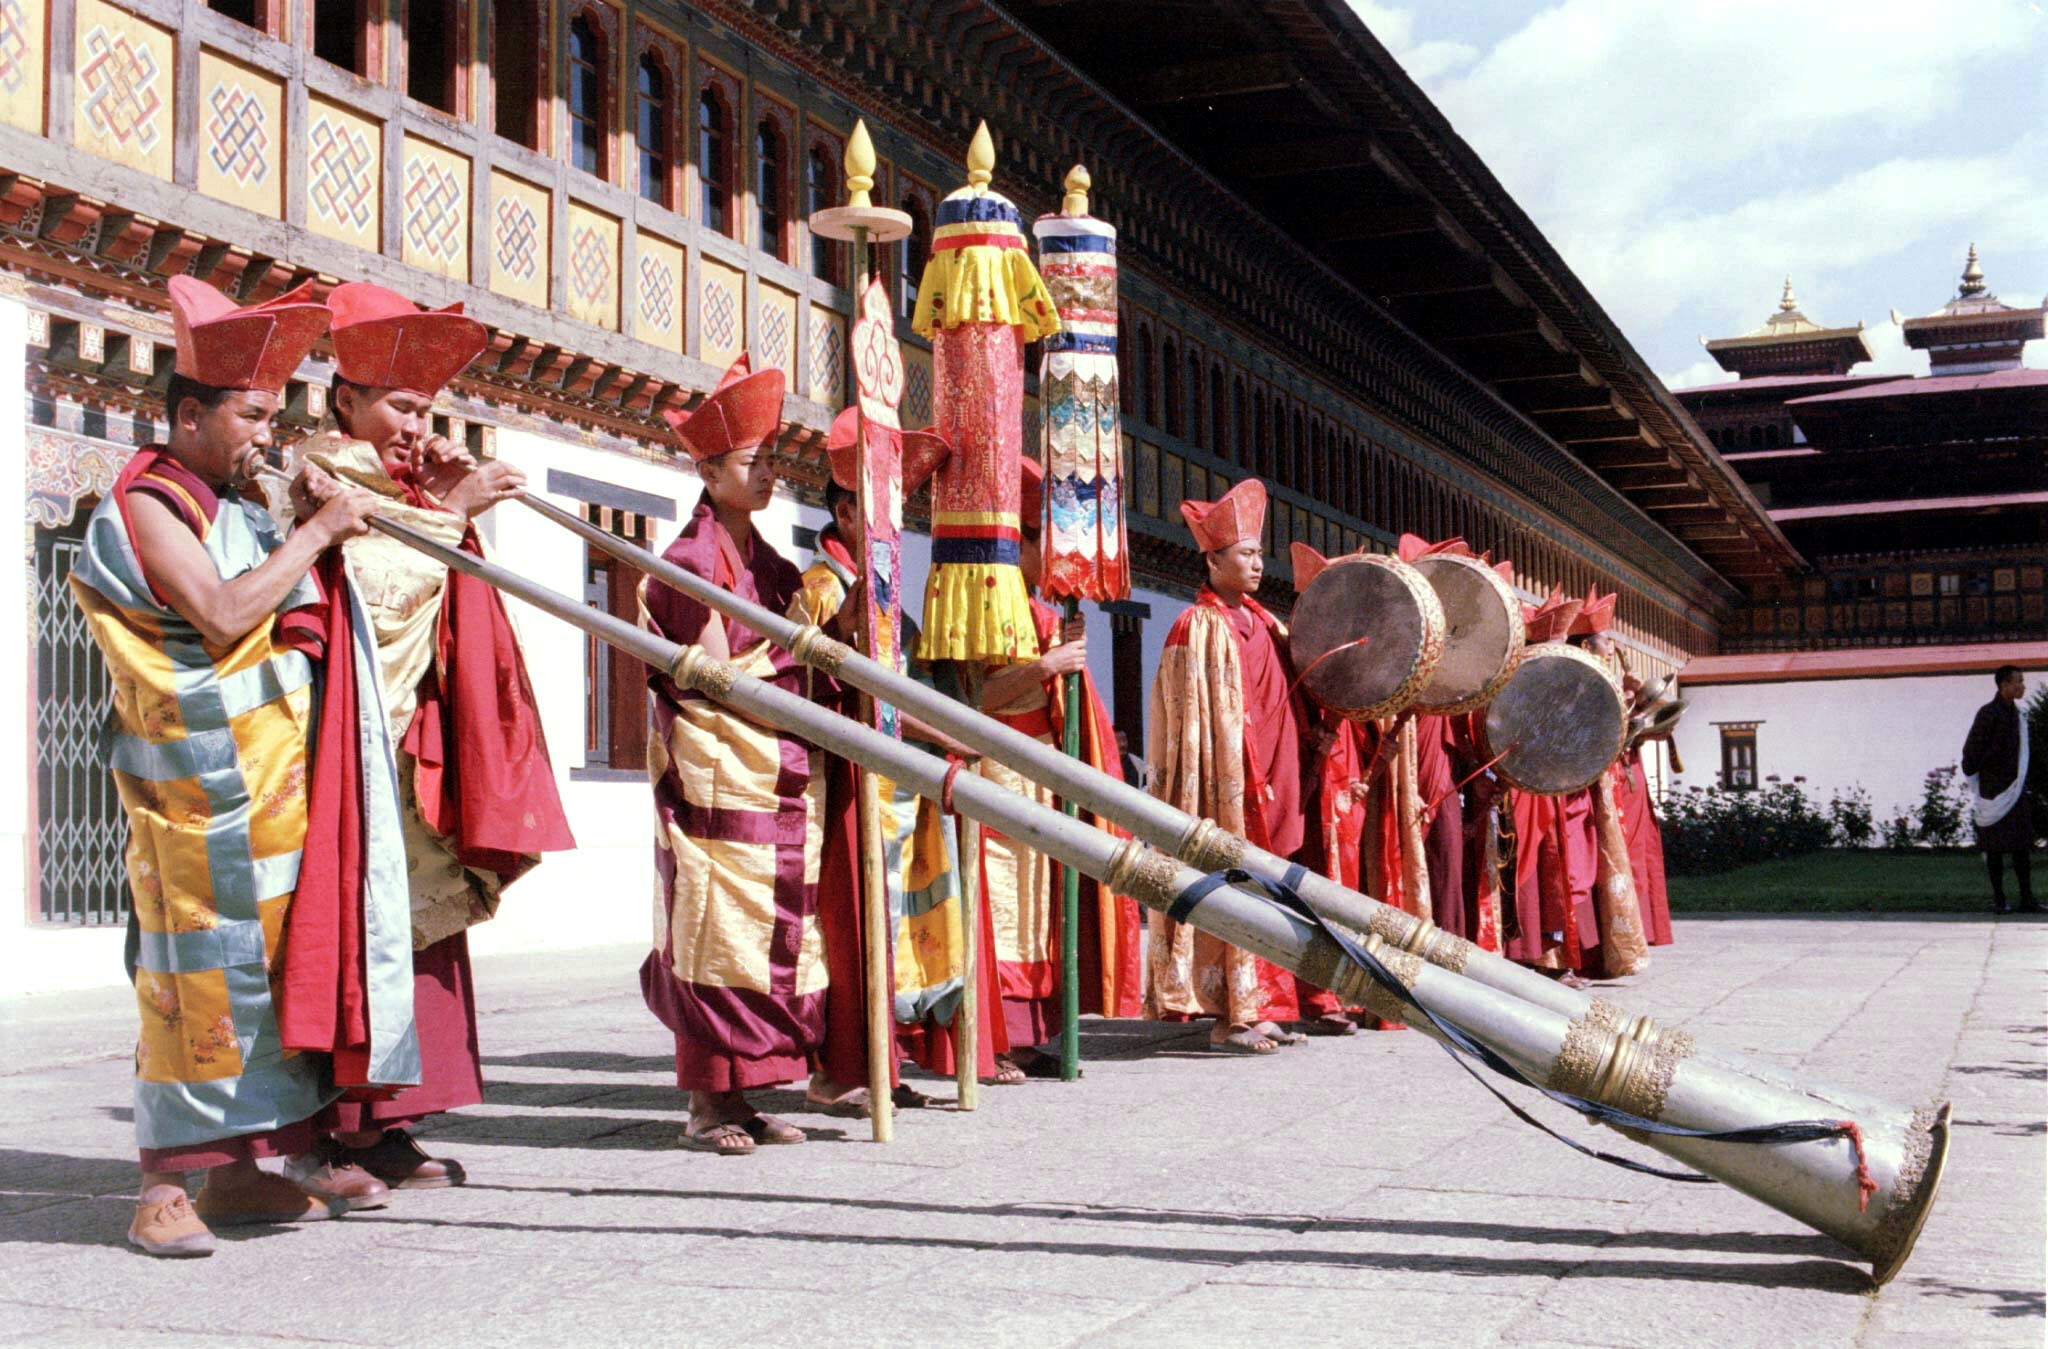 Some Bhutanese men blowing their traditional horns